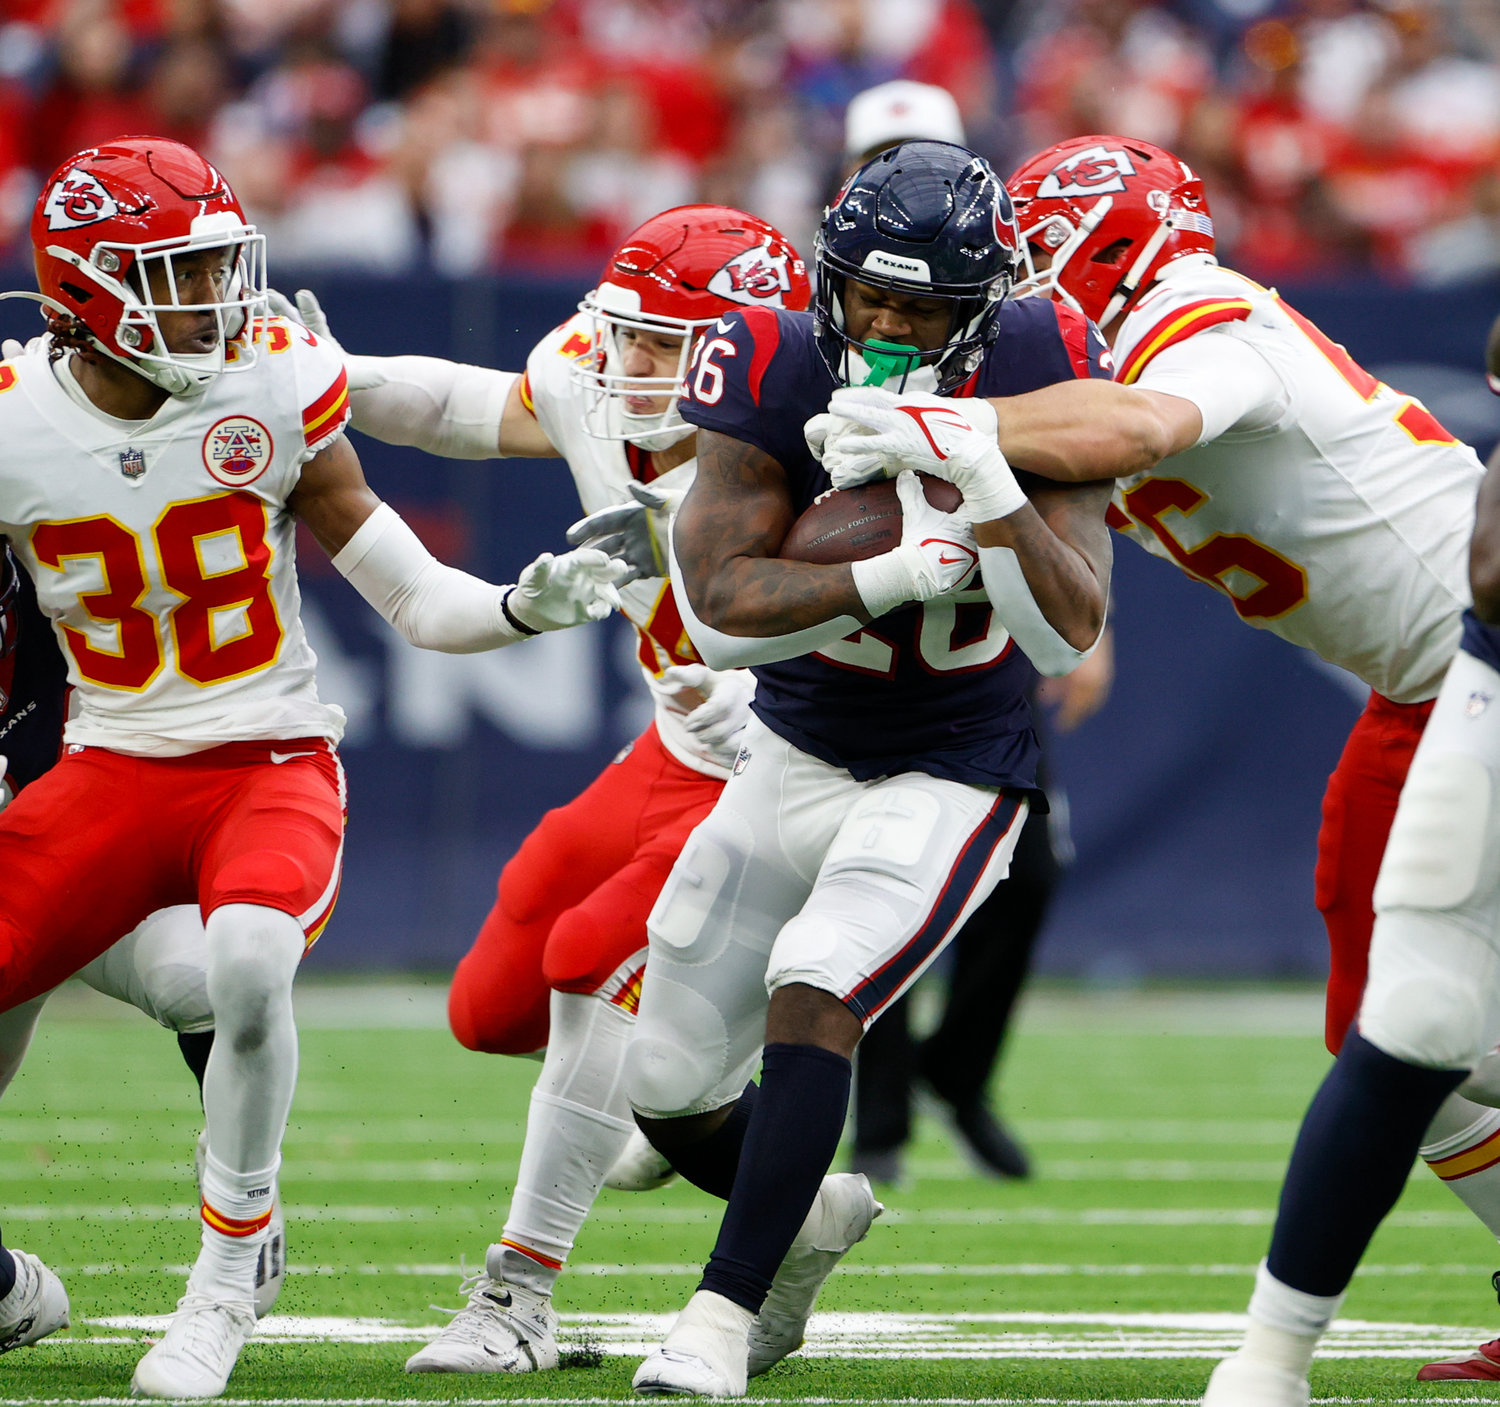 Houston Texans running back Royce Freeman (26) is tackled on a carry during an NFL game between the Texans and the Chiefs on Dec. 18, 2022, in Houston. The Chiefs won, 30-24, in overtime.